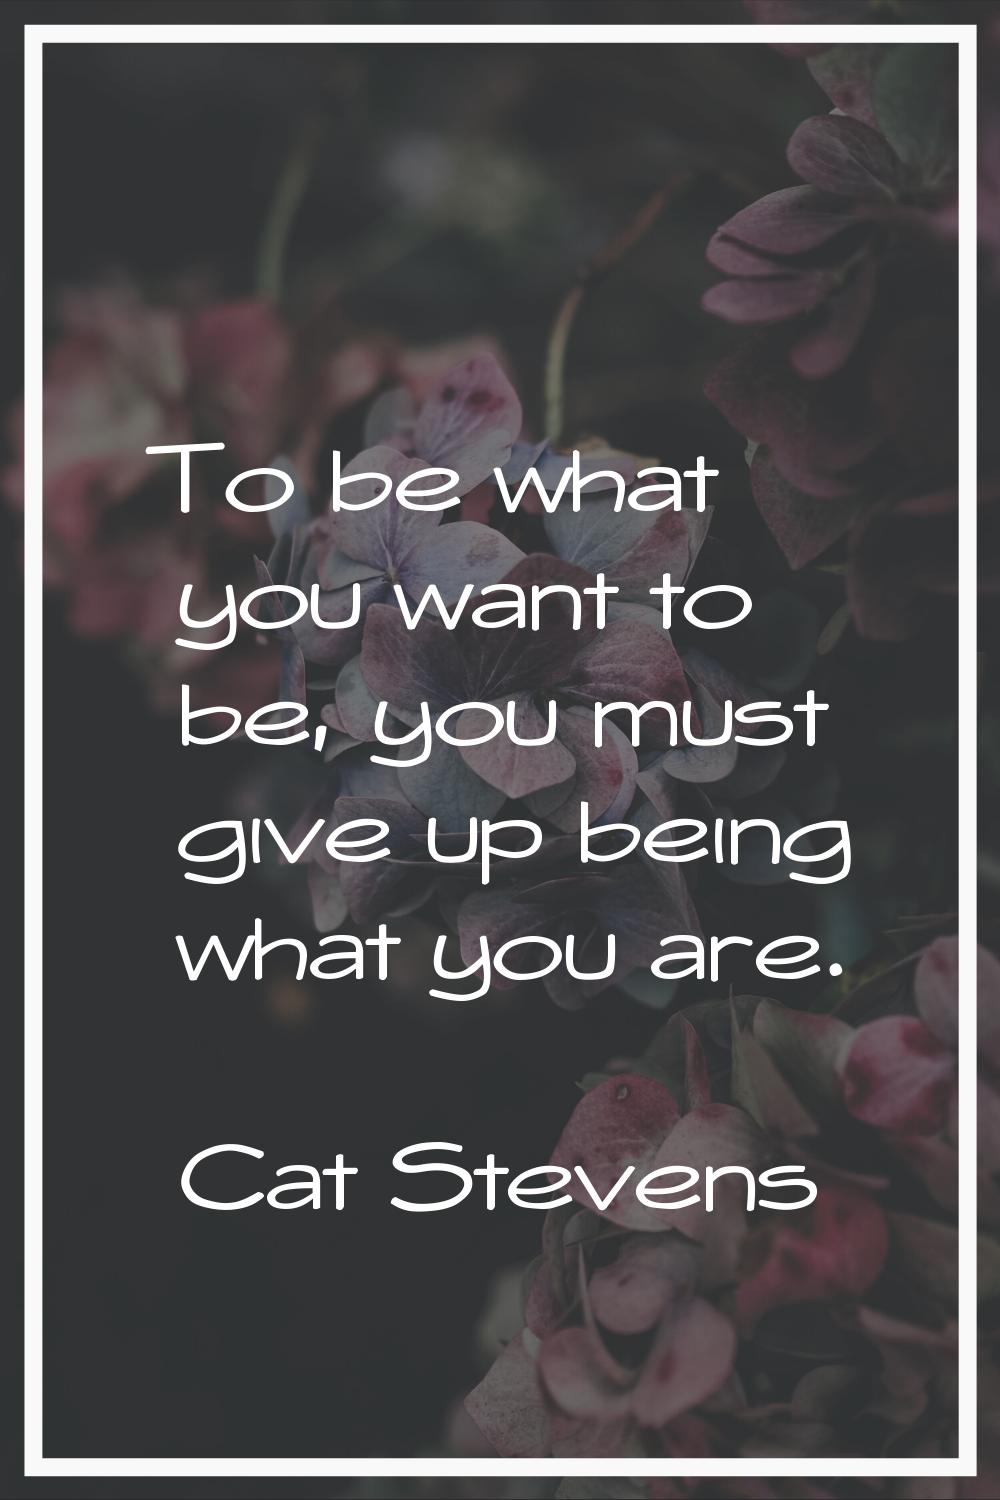 To be what you want to be, you must give up being what you are.